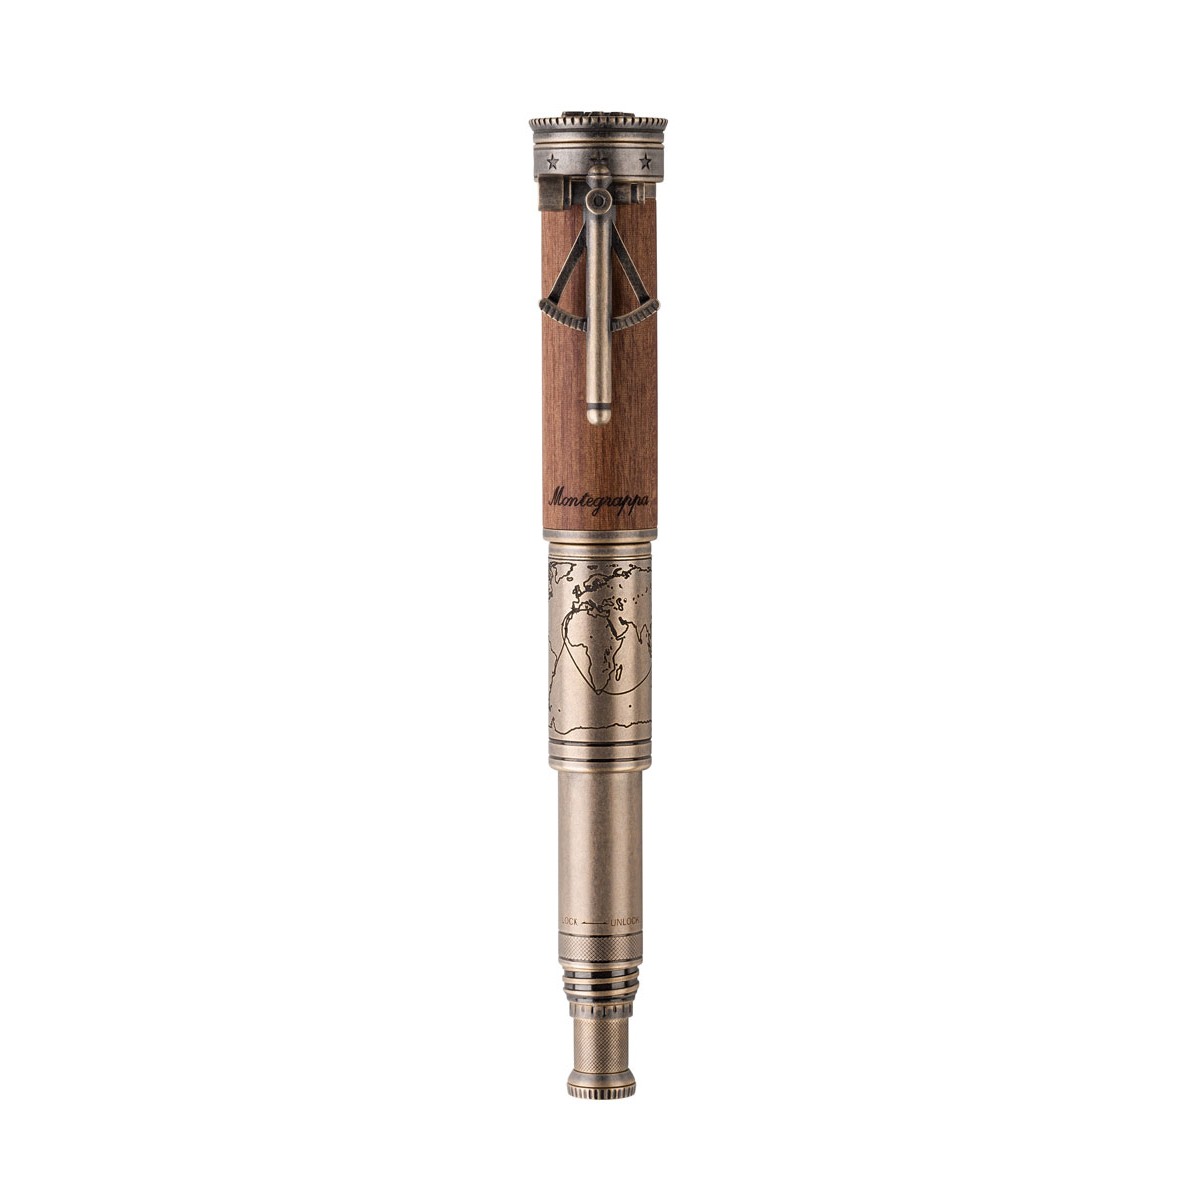 Montegrappa - Age of Discovery - Rollerball Pen - Limited Edition